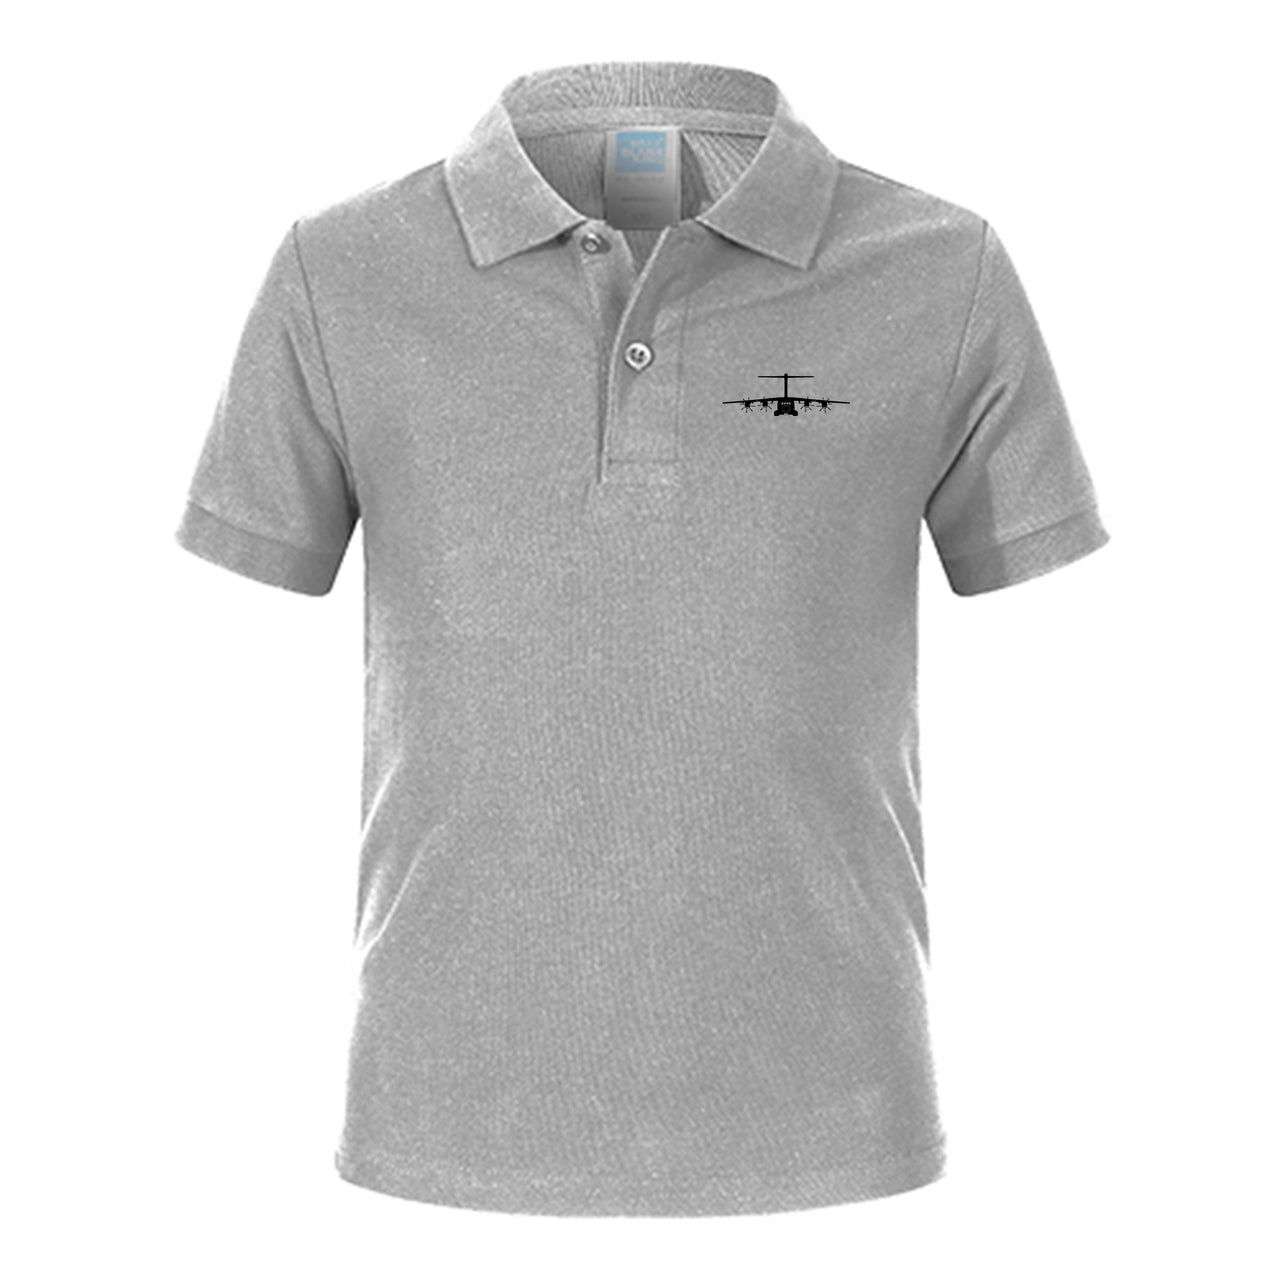 Airbus A400M Silhouette Designed Children Polo T-Shirts